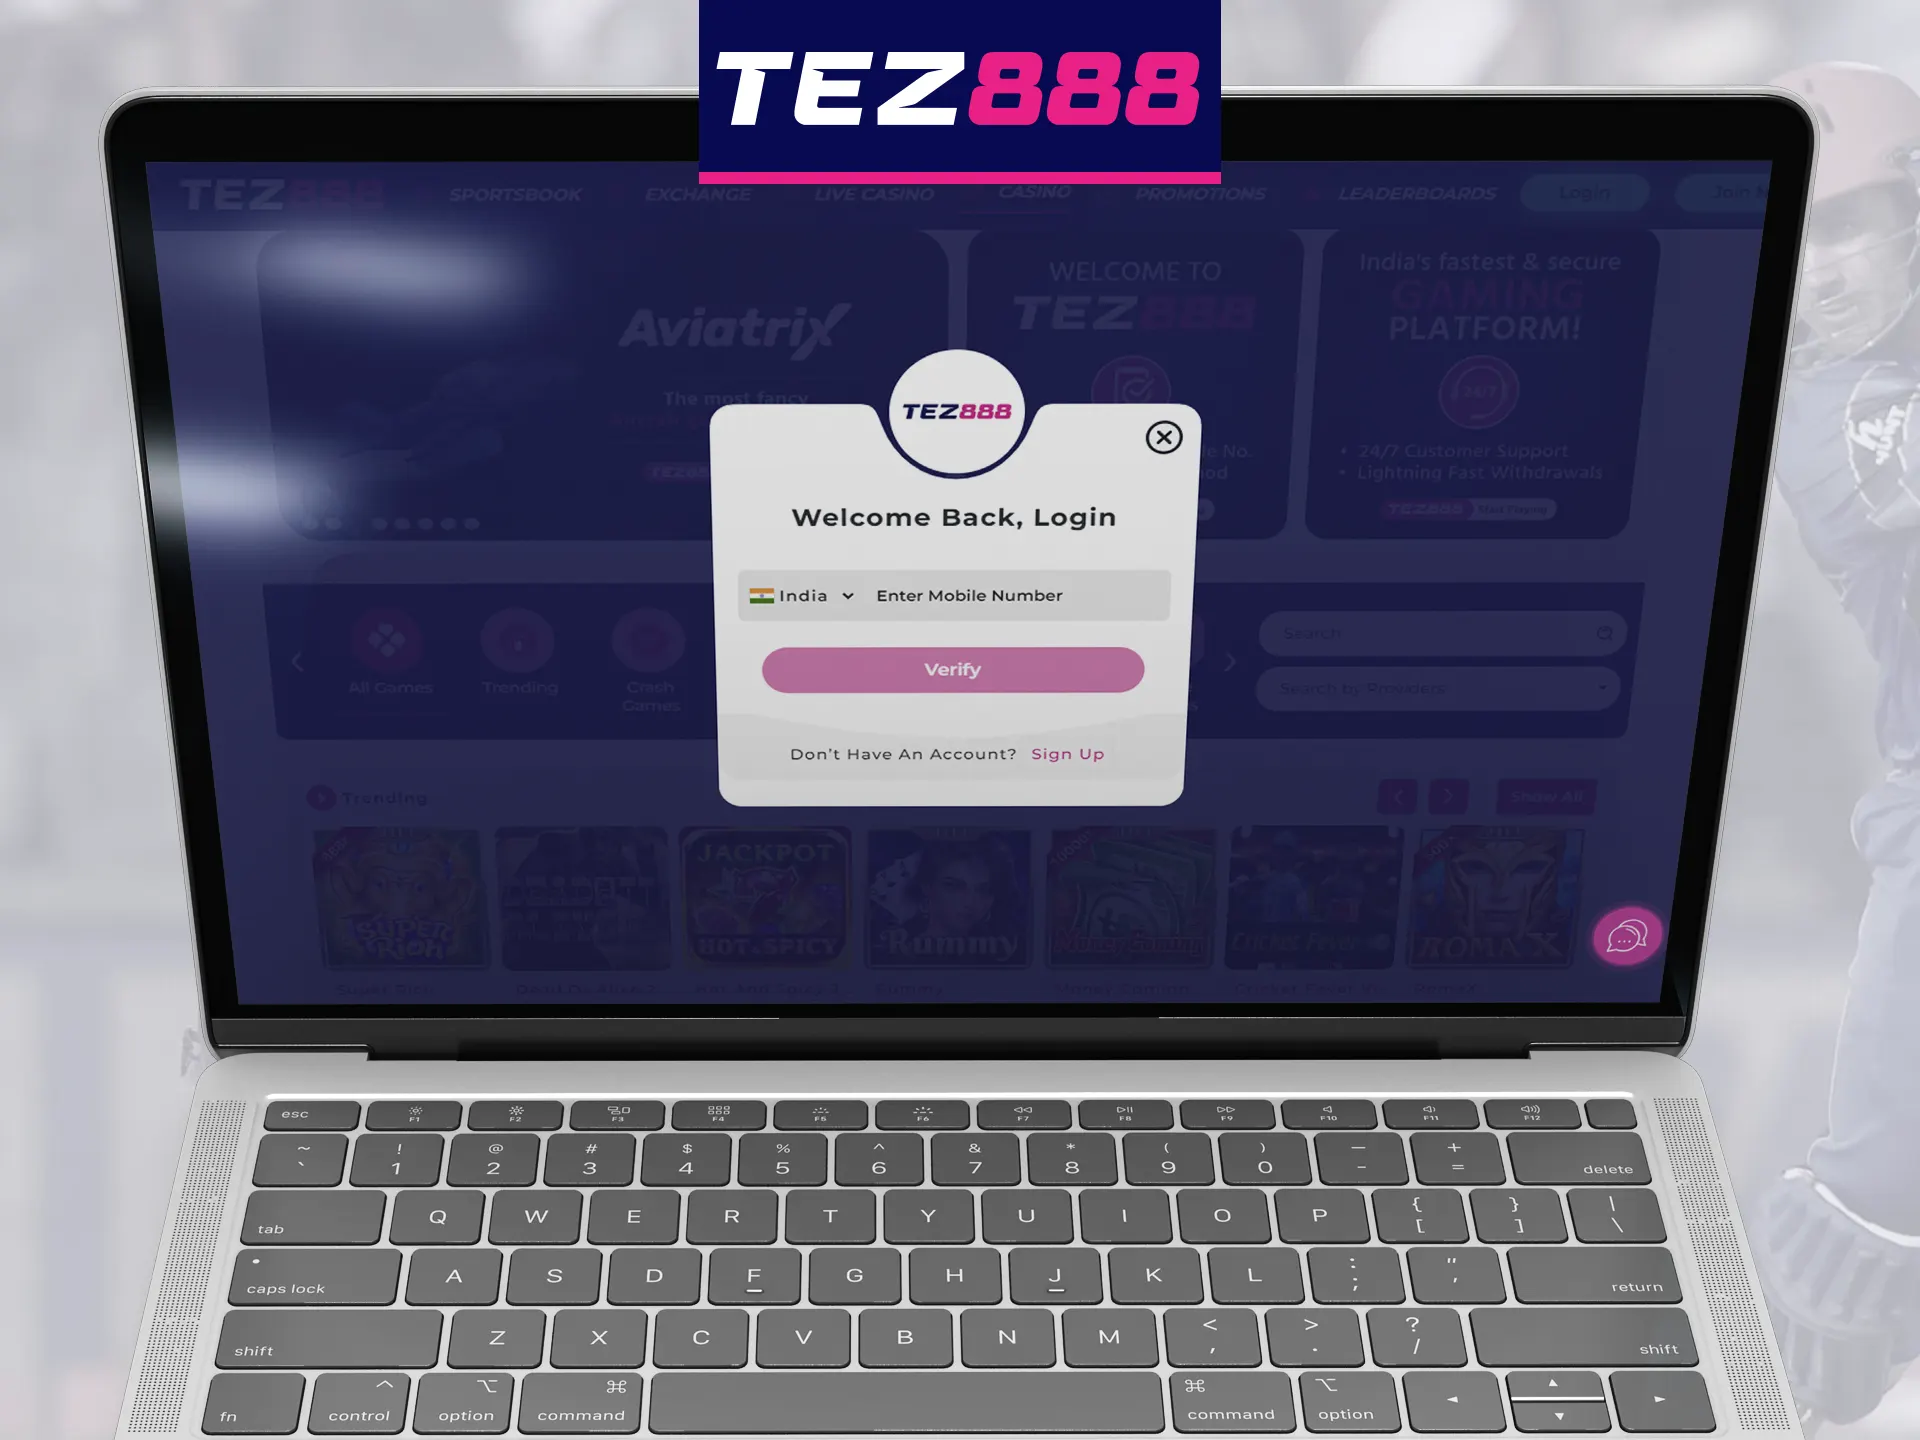 Log in to your Tez888 account from any browser and any device.